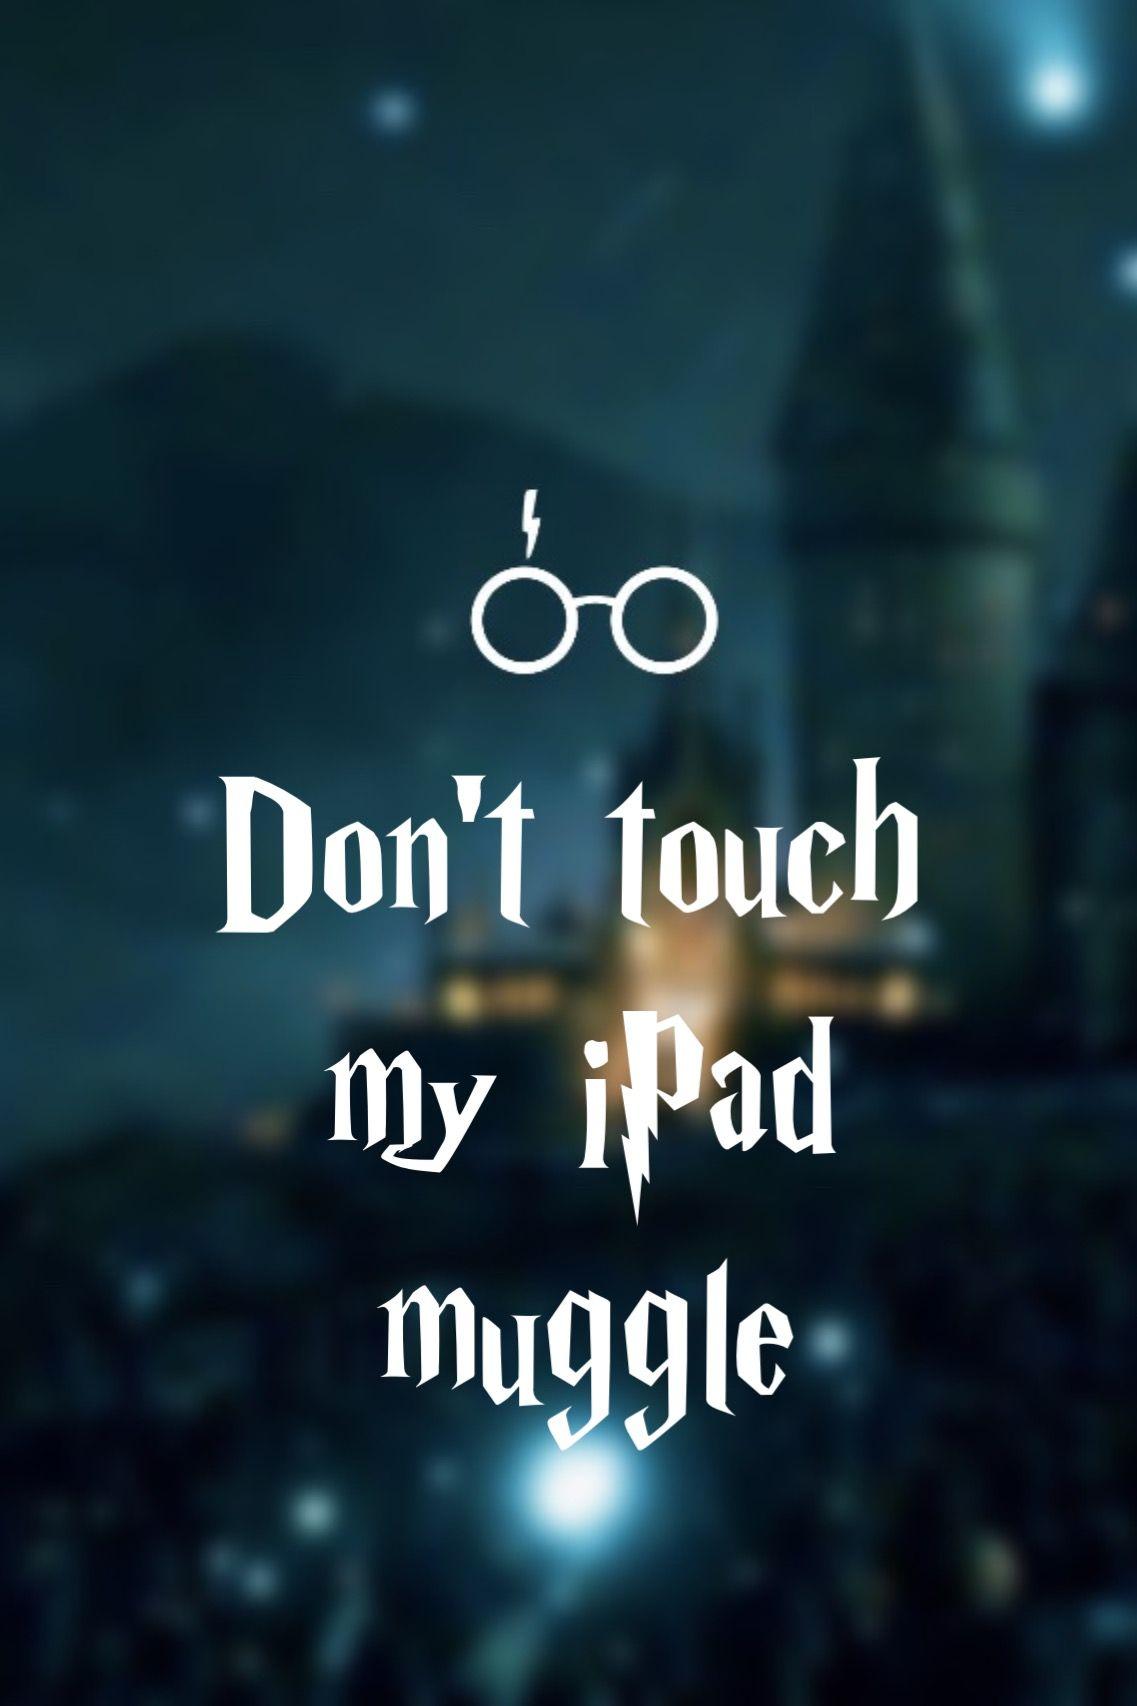 Don't touch my iPad muggle WALLPAPER #HarryPotter. Background